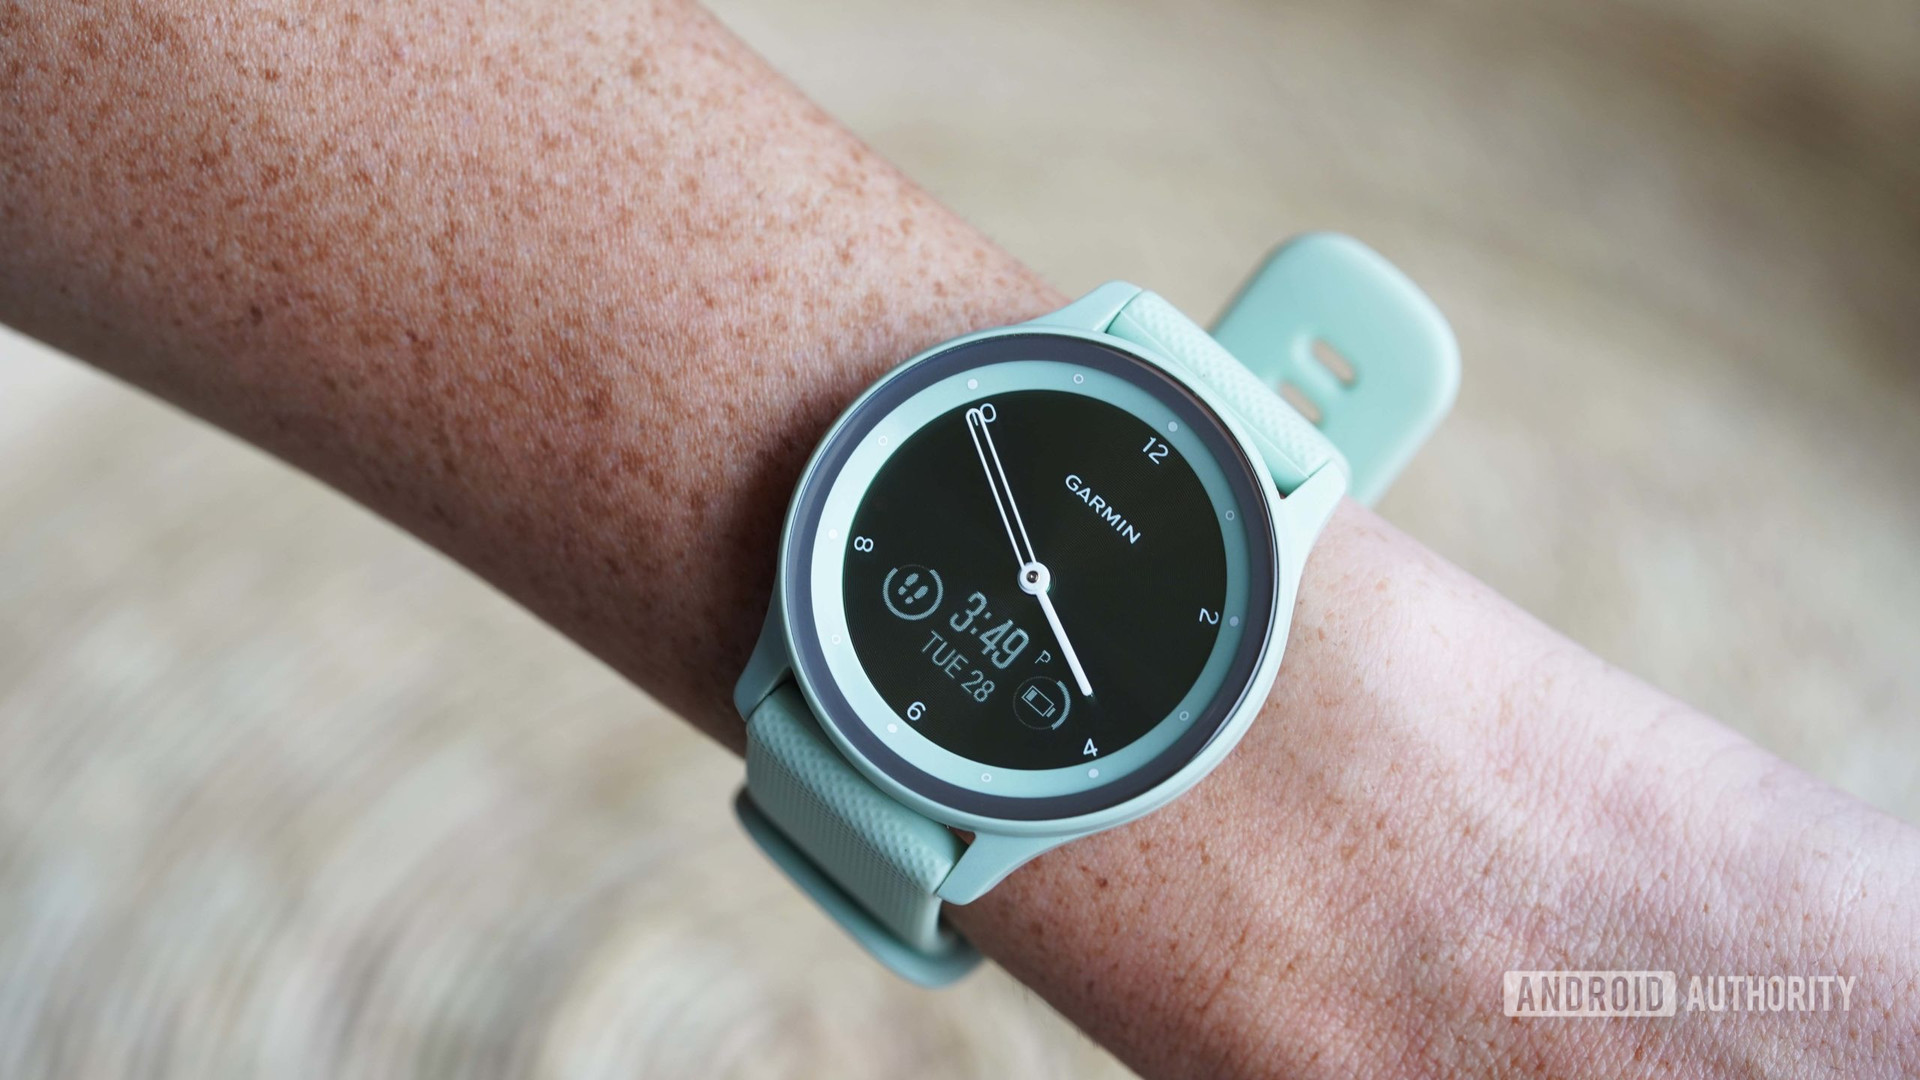 Profeti chikane Kro Garmin vivomove Sport review: The intersection of style and substance